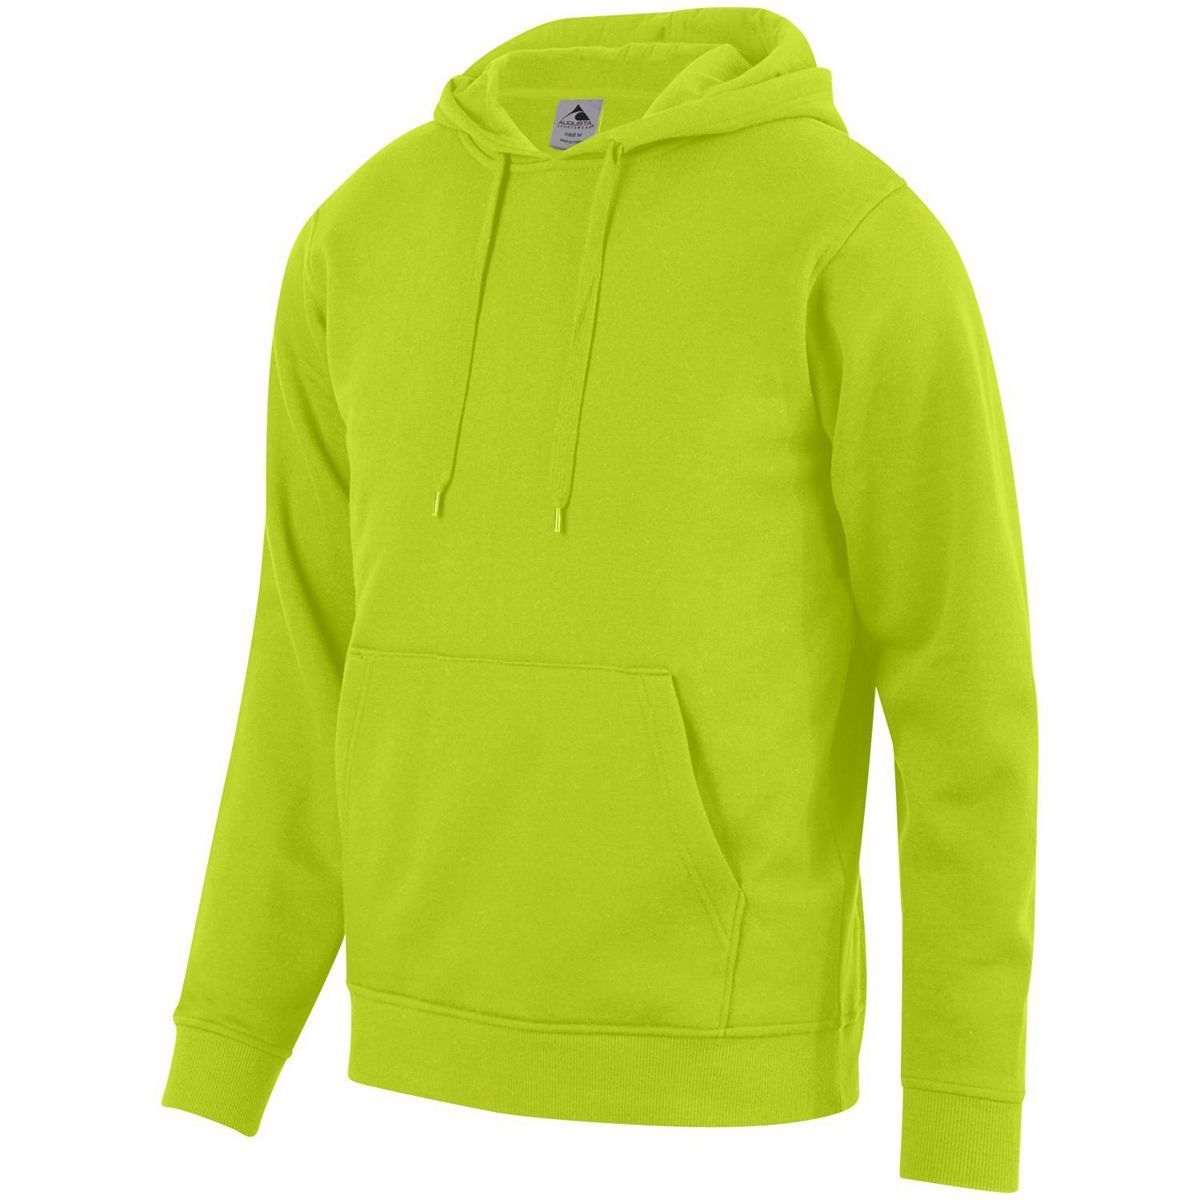 Augusta Sportswear Youth 60/40 Fleece Hoodie in Lime  -Part of the Youth, Youth-Hoodie, Hoodies, Augusta-Products product lines at KanaleyCreations.com